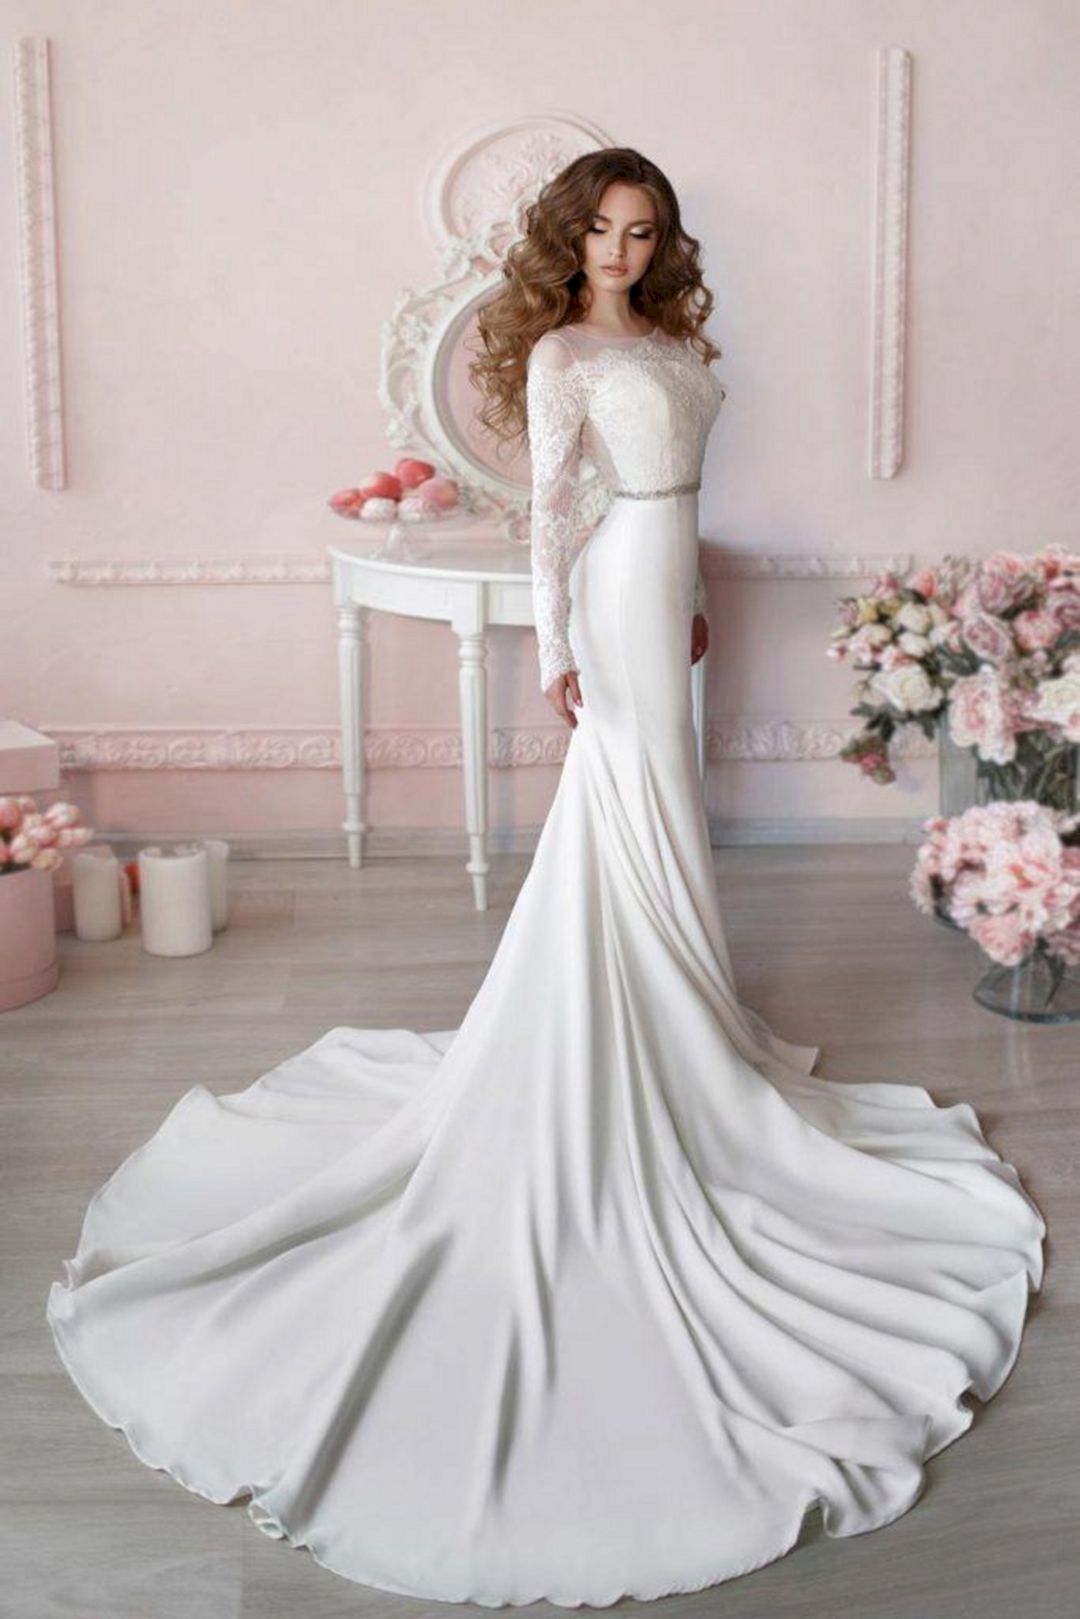 Long sleeve wedding dresses for your wedding from glaminati